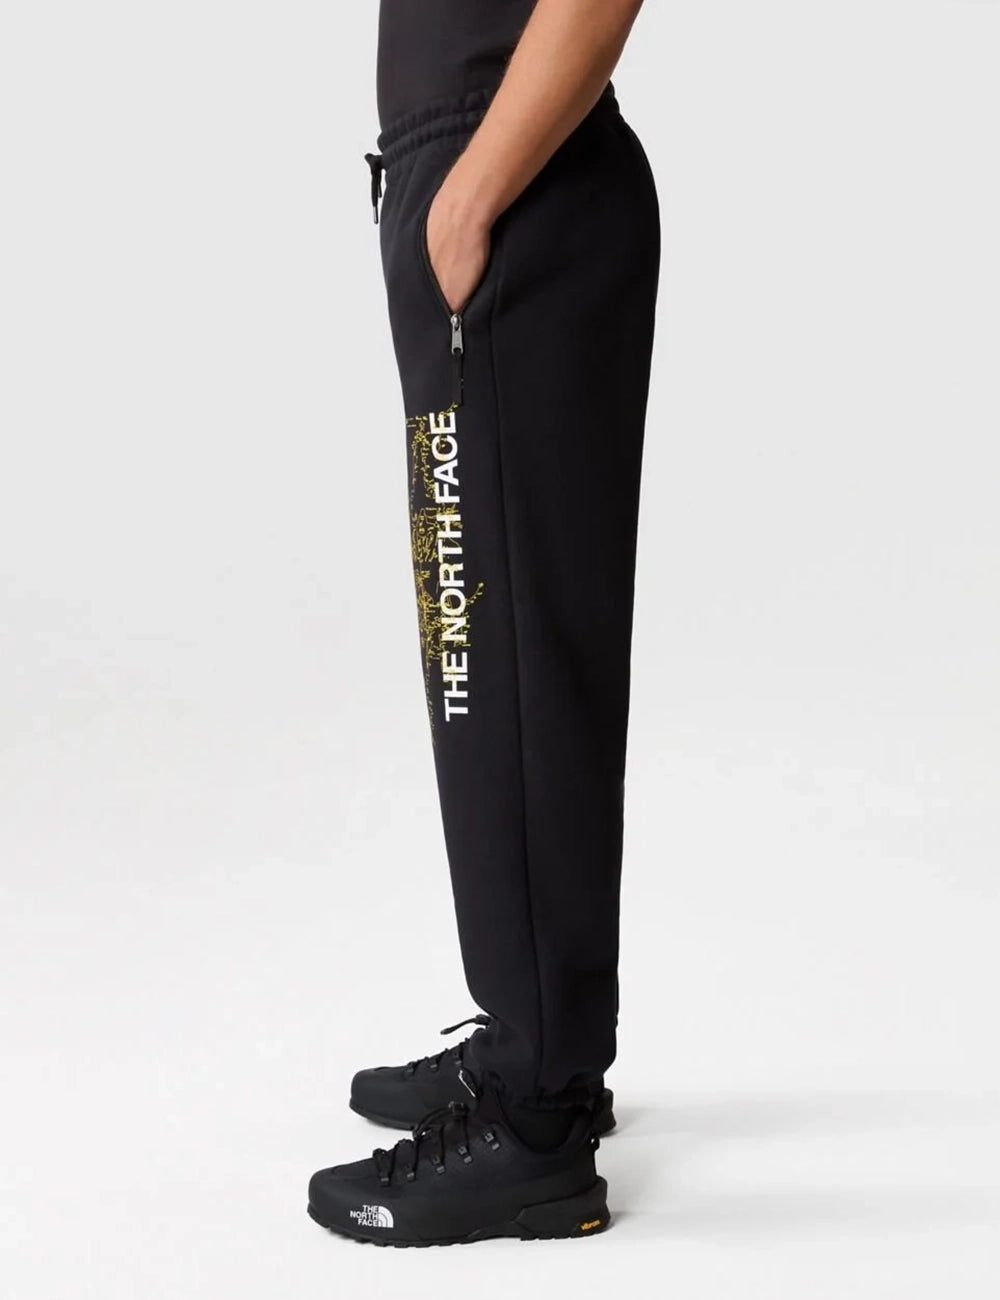 THE NORTHFACE MEN'S HEAVYWEIGHT RLXD FIT SWEATPANT